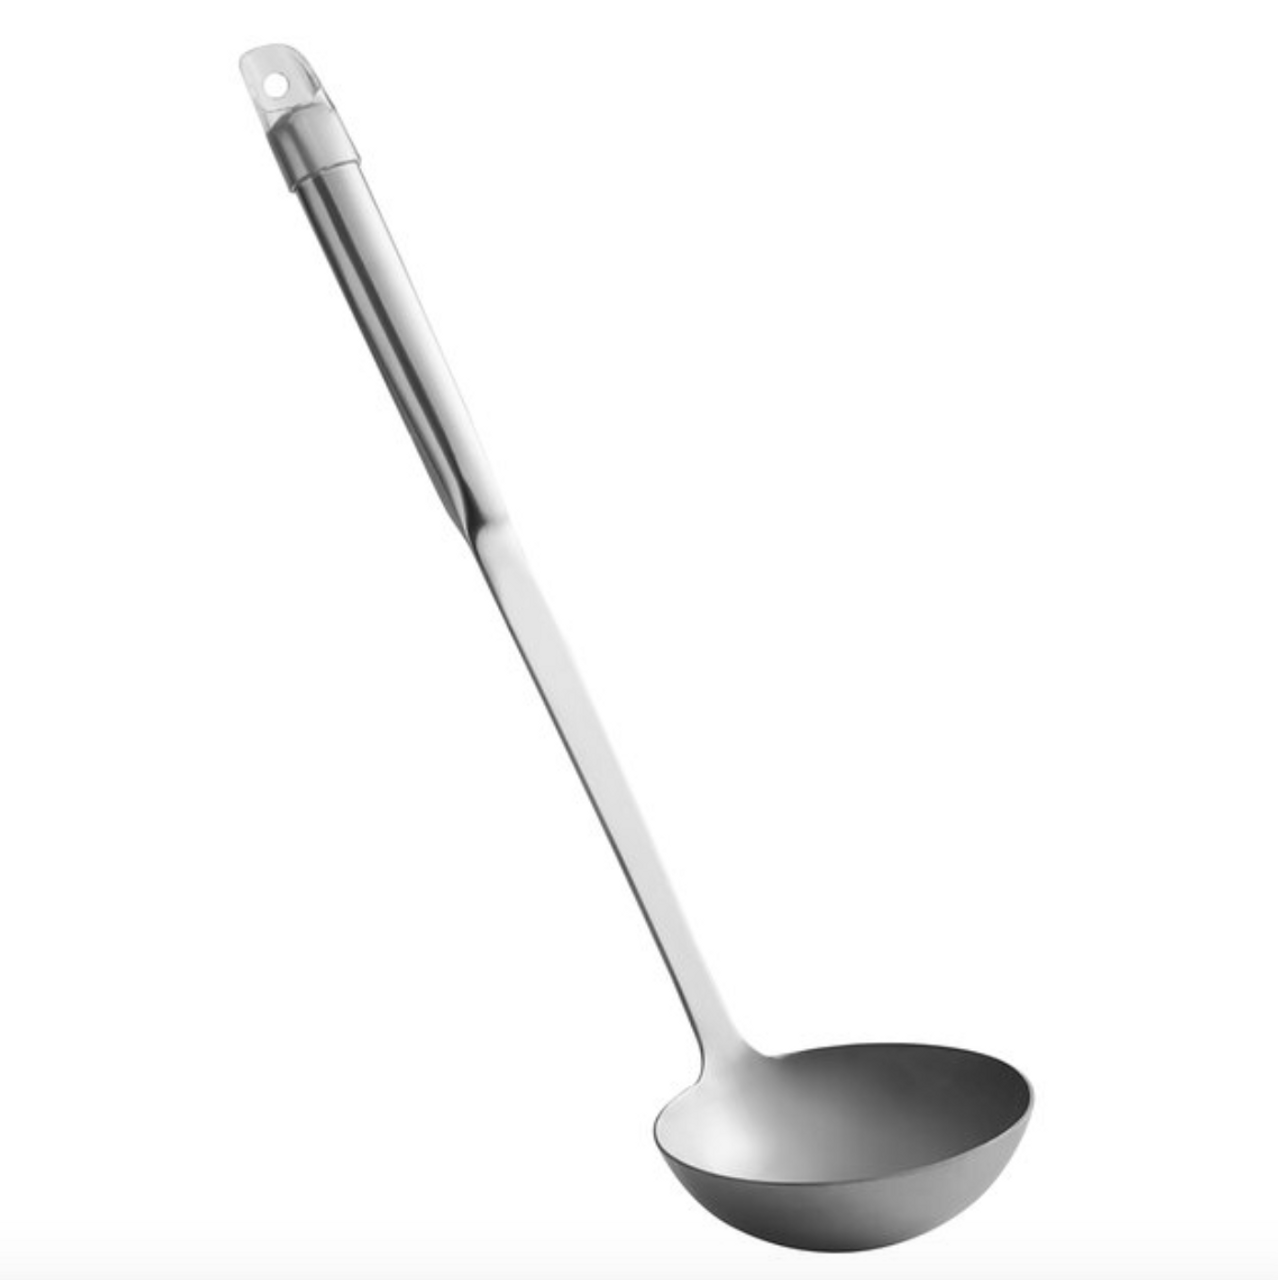 Hollow Stainless Steel Handle Ladle 4oz